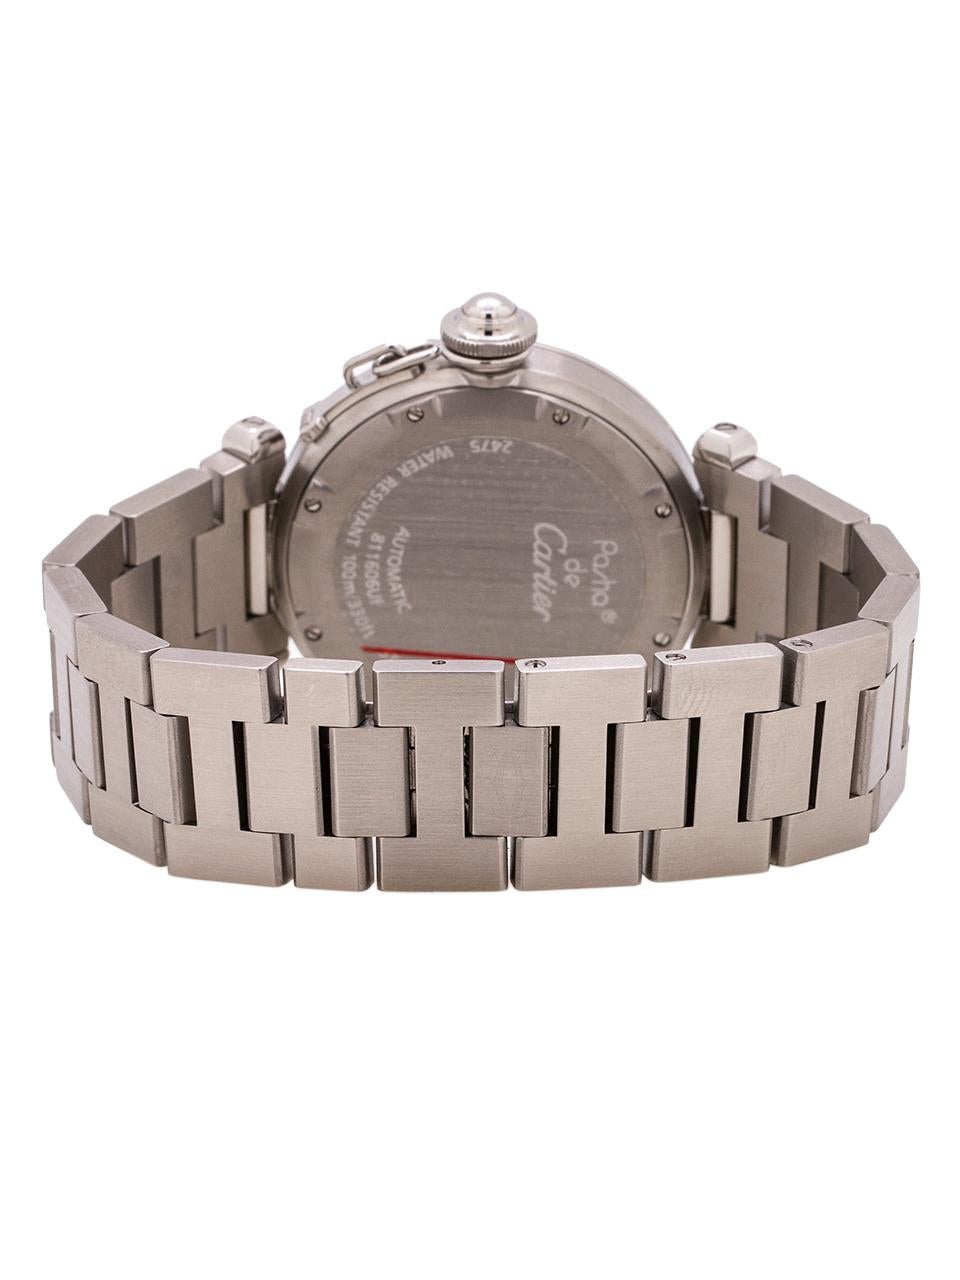 Men's Cartier Pasha C “Big Date” Stainless Steel Automatic Watch, circa 2000s For Sale